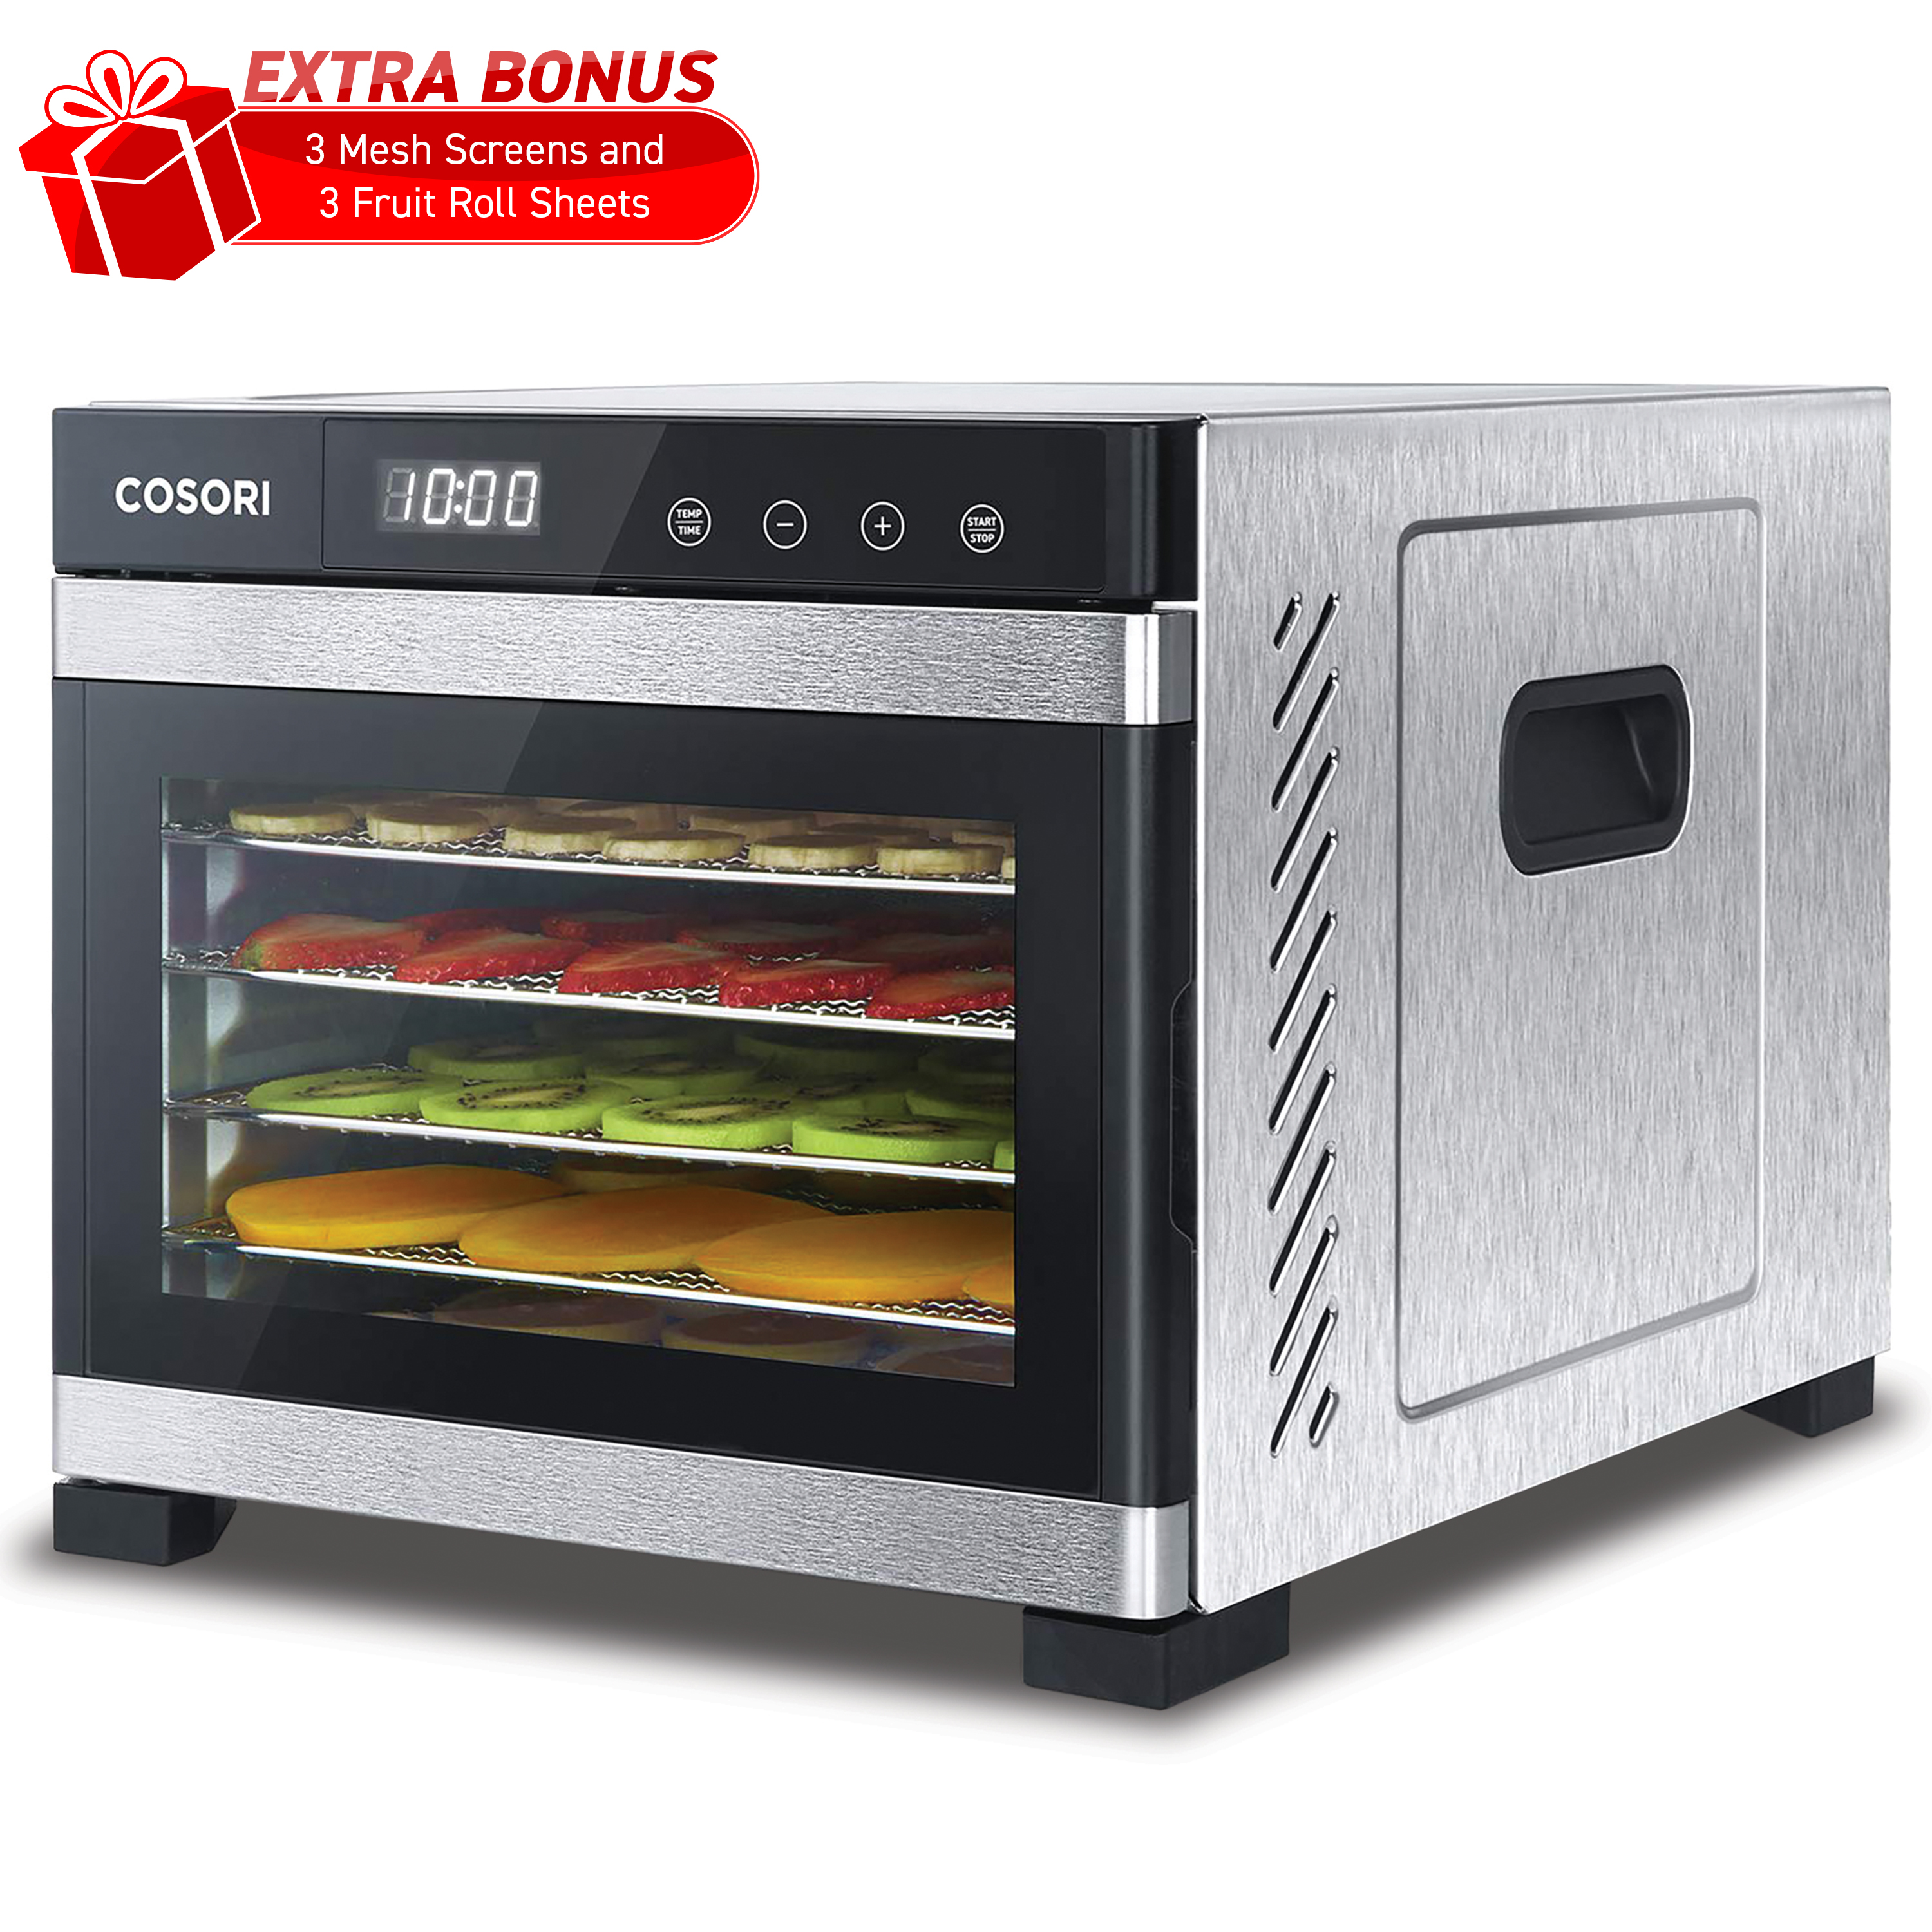 COSORI Food Dehydrator with 6 Stainless Steel Trays, 600W, Extra Bonus, Silver, CP267-FD-RXS - image 1 of 6